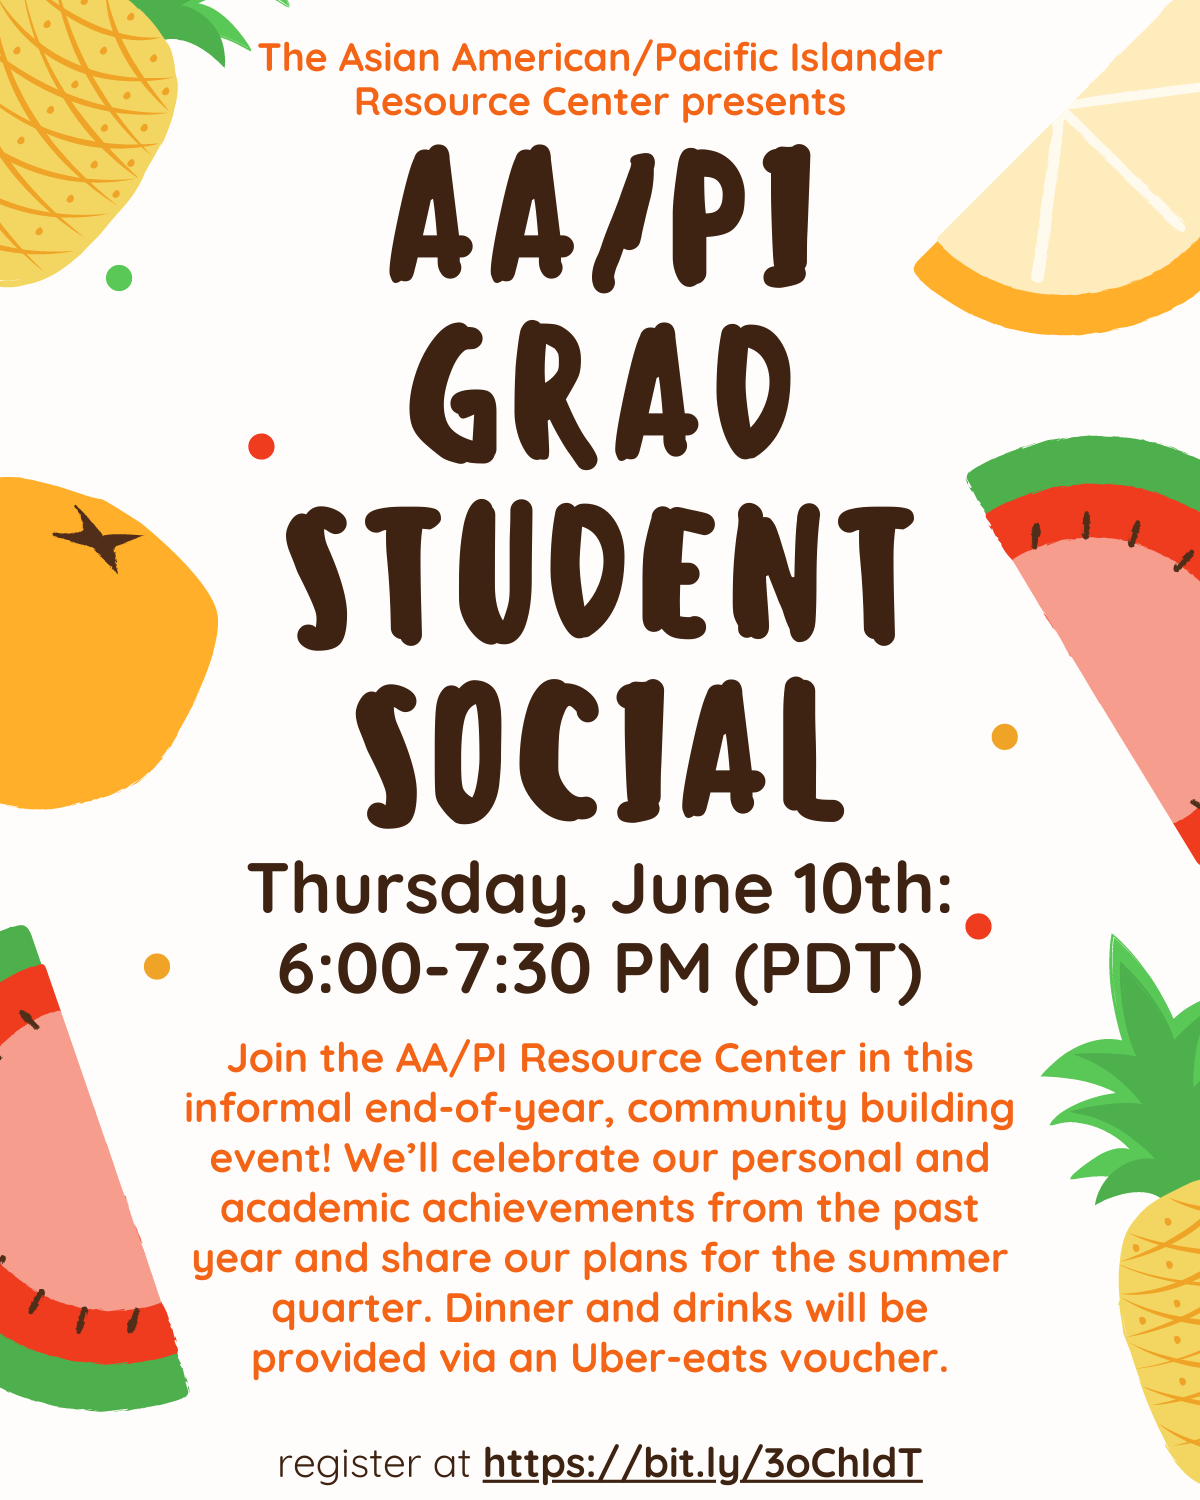 White flyer covered in pineapples, oranges, and melons. Top of the flyer says "The Asian American/Pacific Islander Resource Center presents AA/PI Grad Student Social" Bottom text mentions "Thursday, June 10th: 6:00 to 7:30 PM PDT. Bottom text says "Join the AA/PI Resource Center in this informal end-of-year, community building event! We'll celebrate our personal and academic achievements from the past year and share our plans for the summer quarter. Dinner and drinks will be provided via an Uber-eats voucher. Register at https://bit.ly/3oChldT